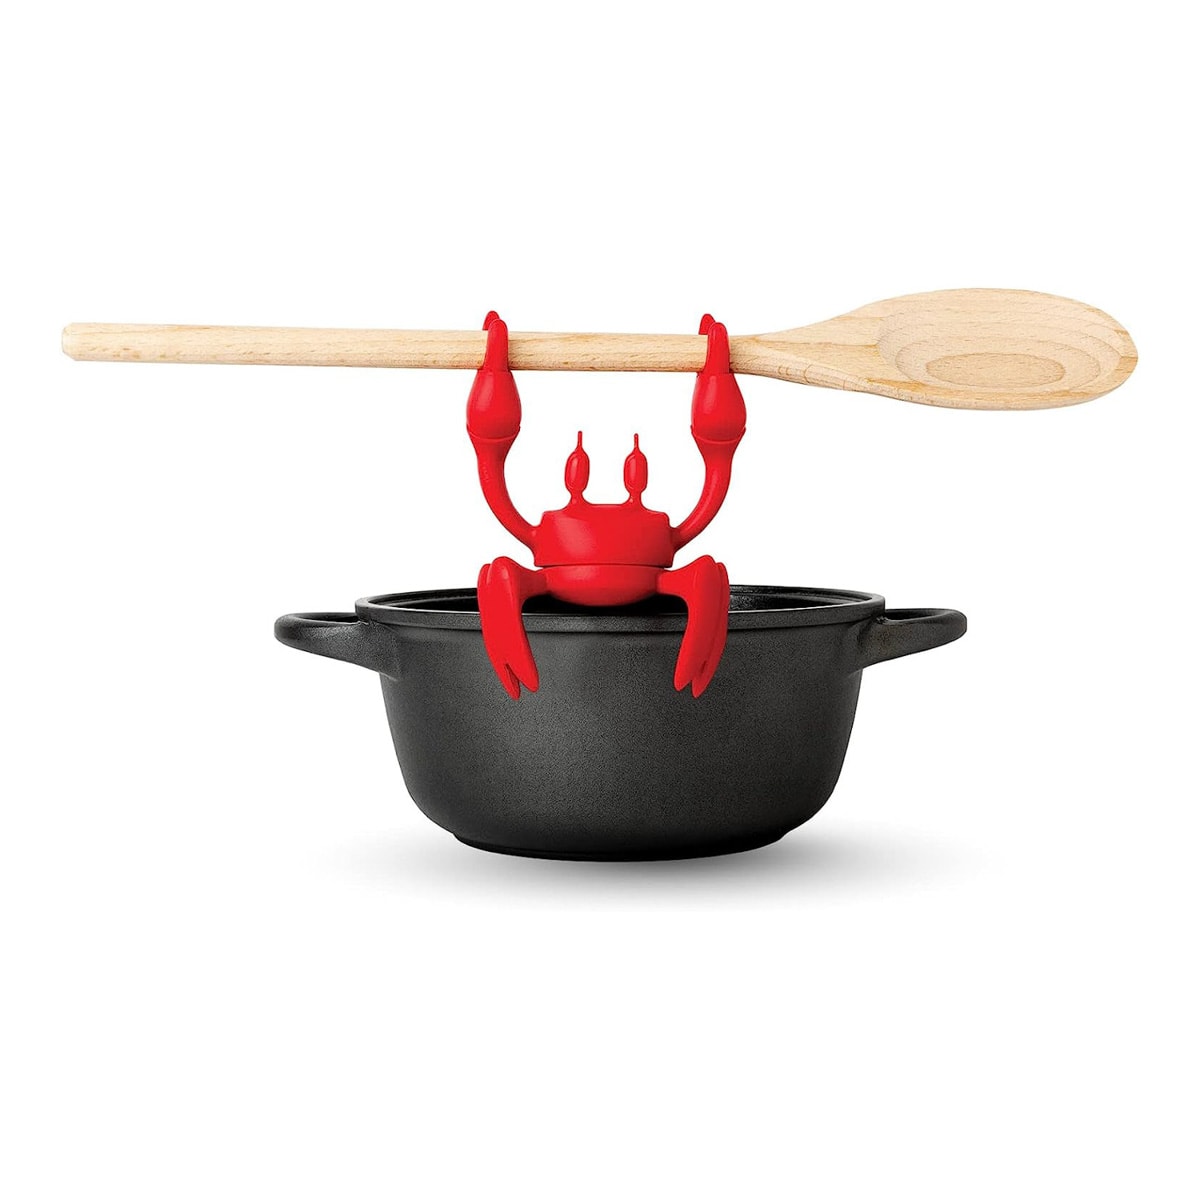 Red the Crab silicone utensil rest holding a wooden spoon on top of a dutch oven.